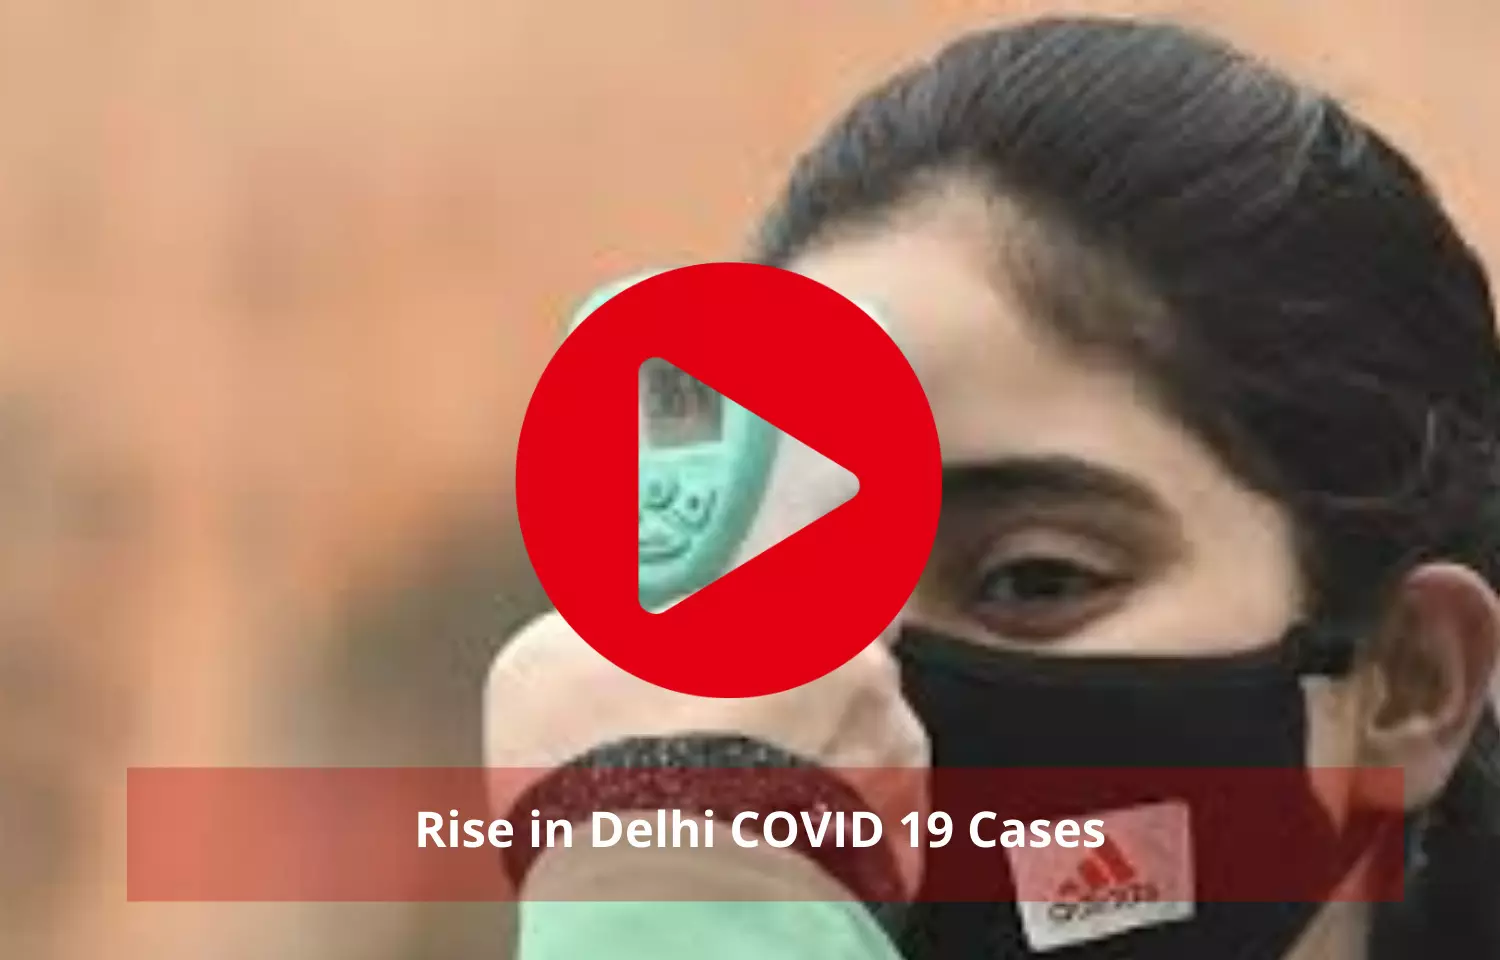 Delhi Covid cases at 40-day high of 299, up 48 percent in 24 hours